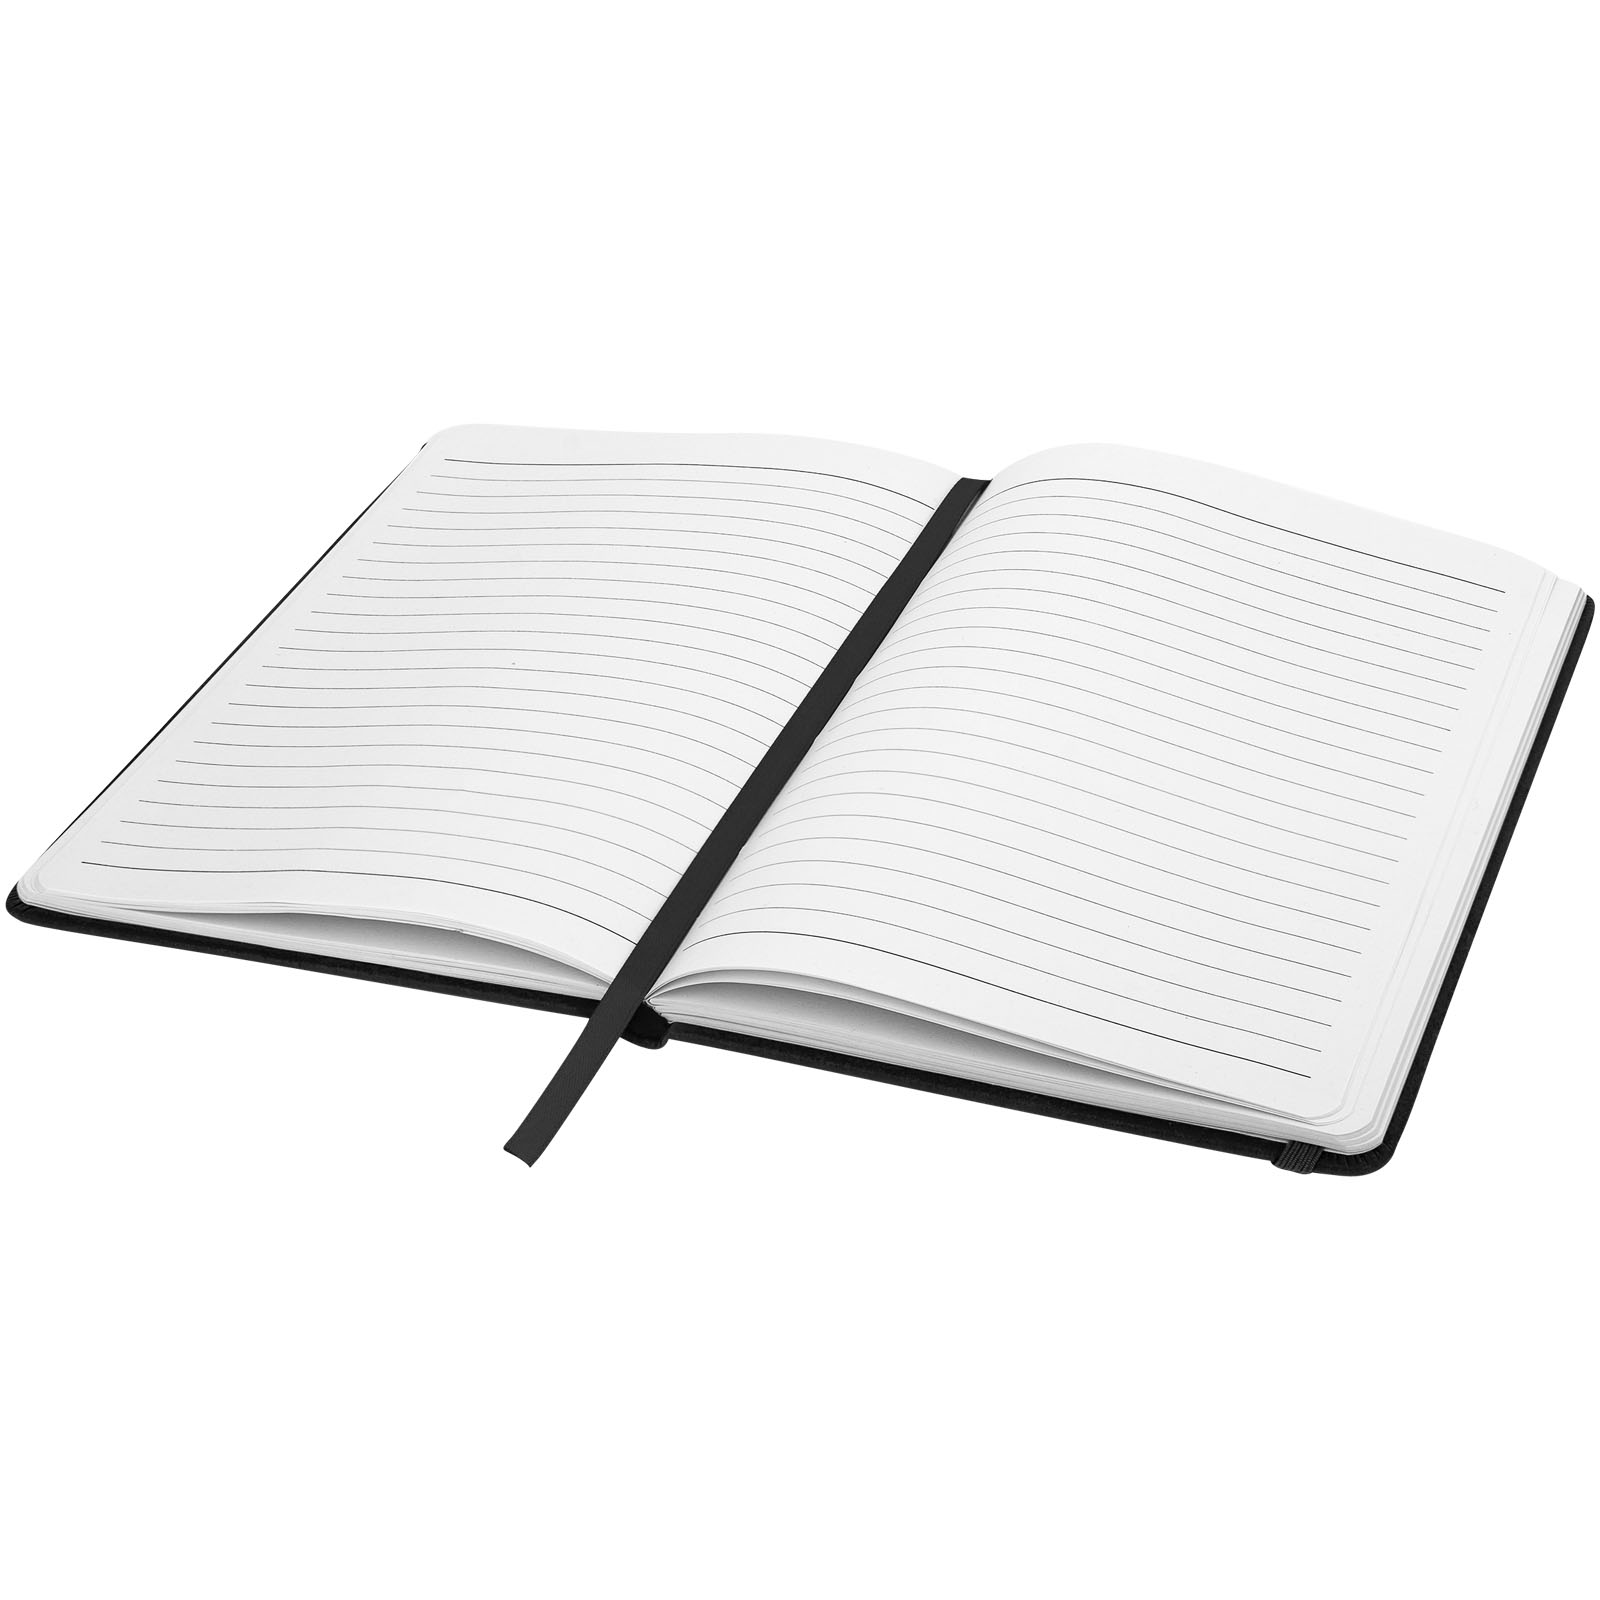 Advertising Hard cover notebooks - Spectrum A5 hard cover notebook - 3